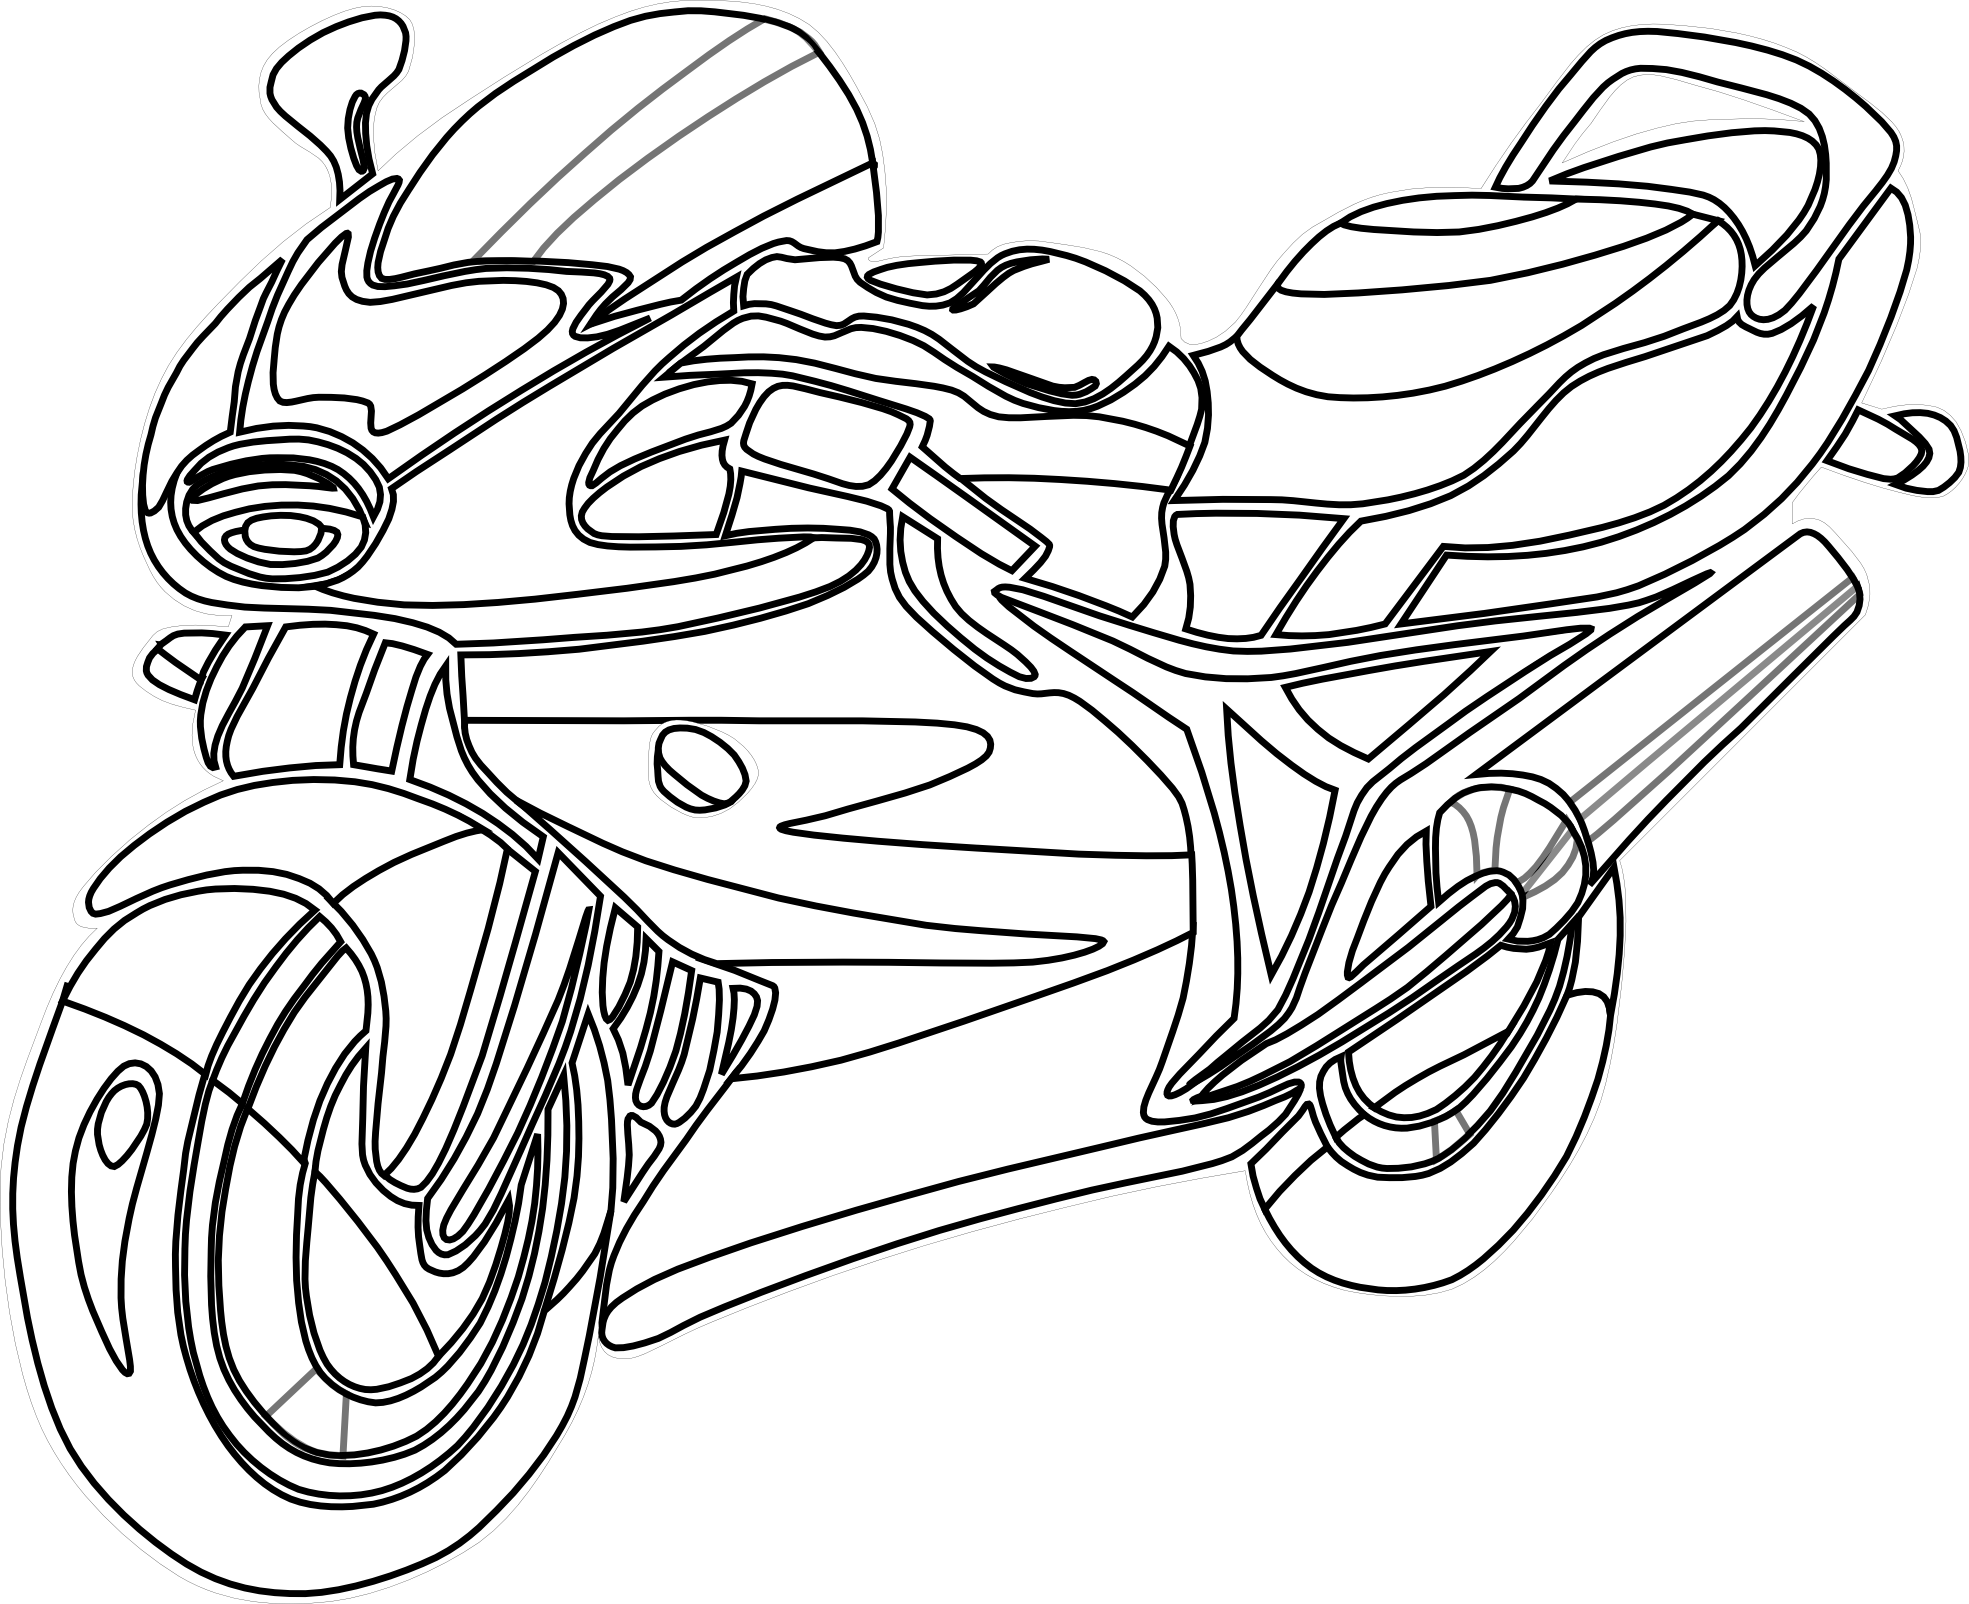 Motorcycle Line Drawing